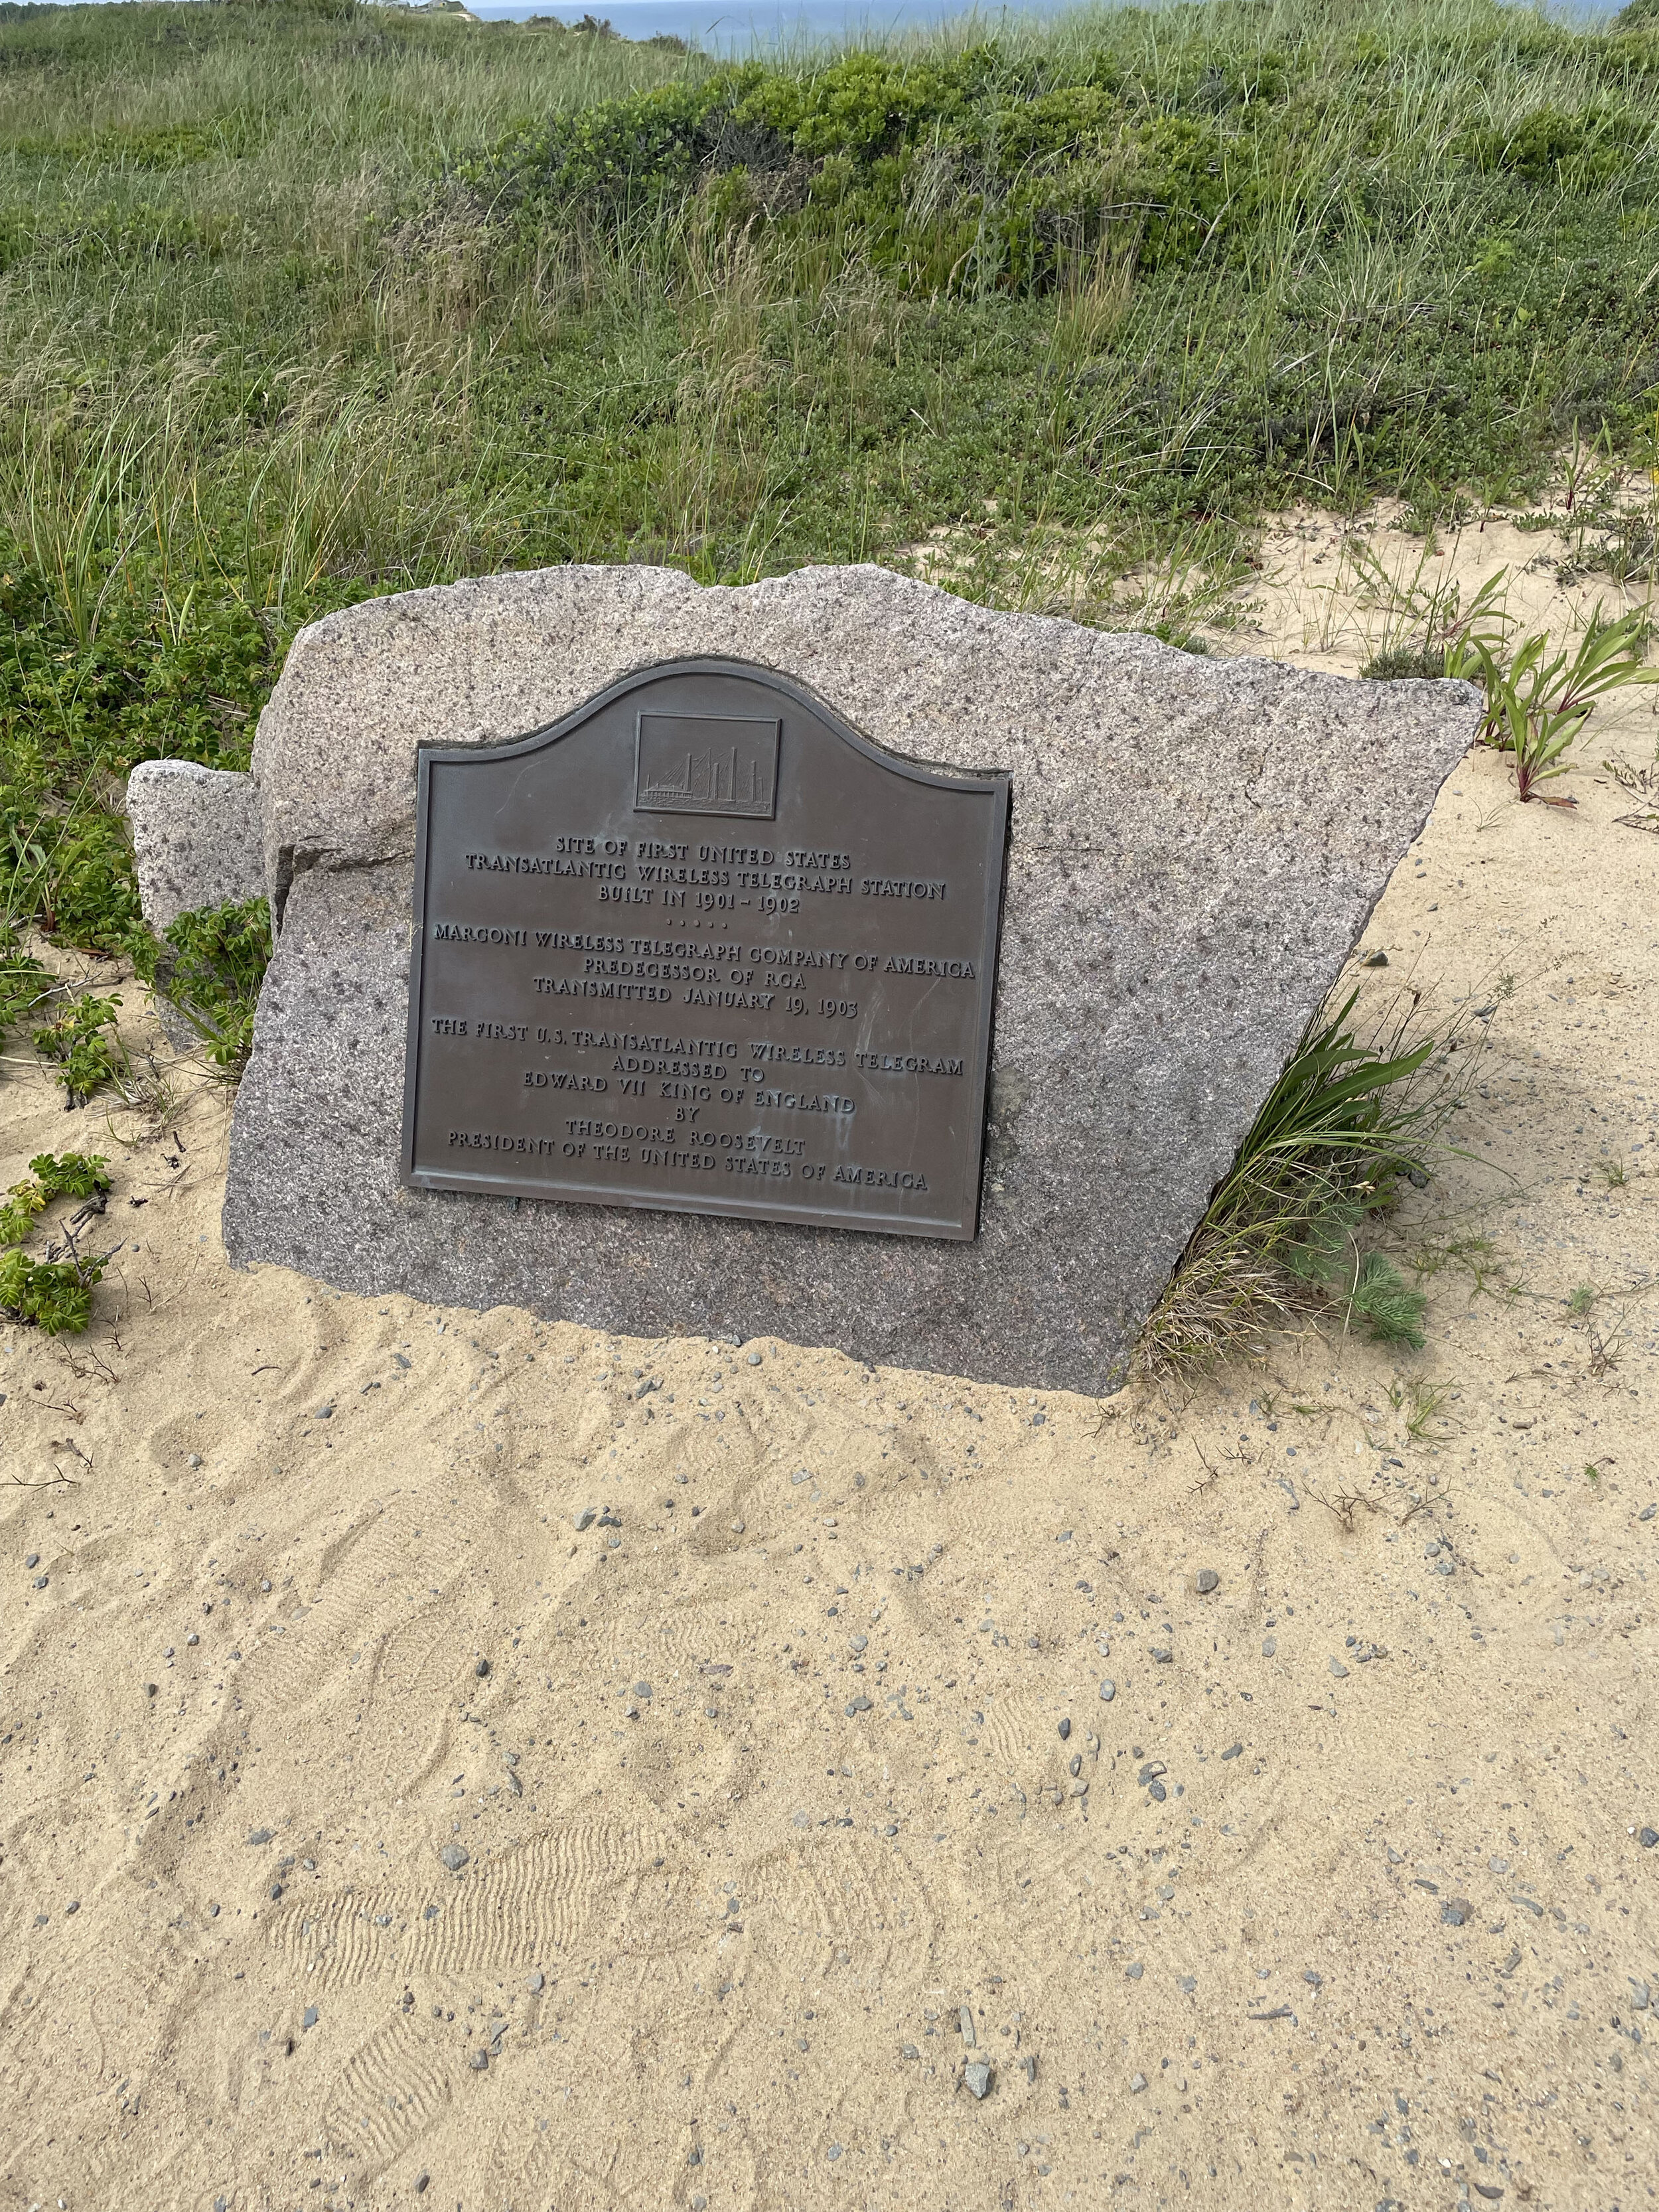 Marconi and the South Wellfleet Wireless Telegraph Station